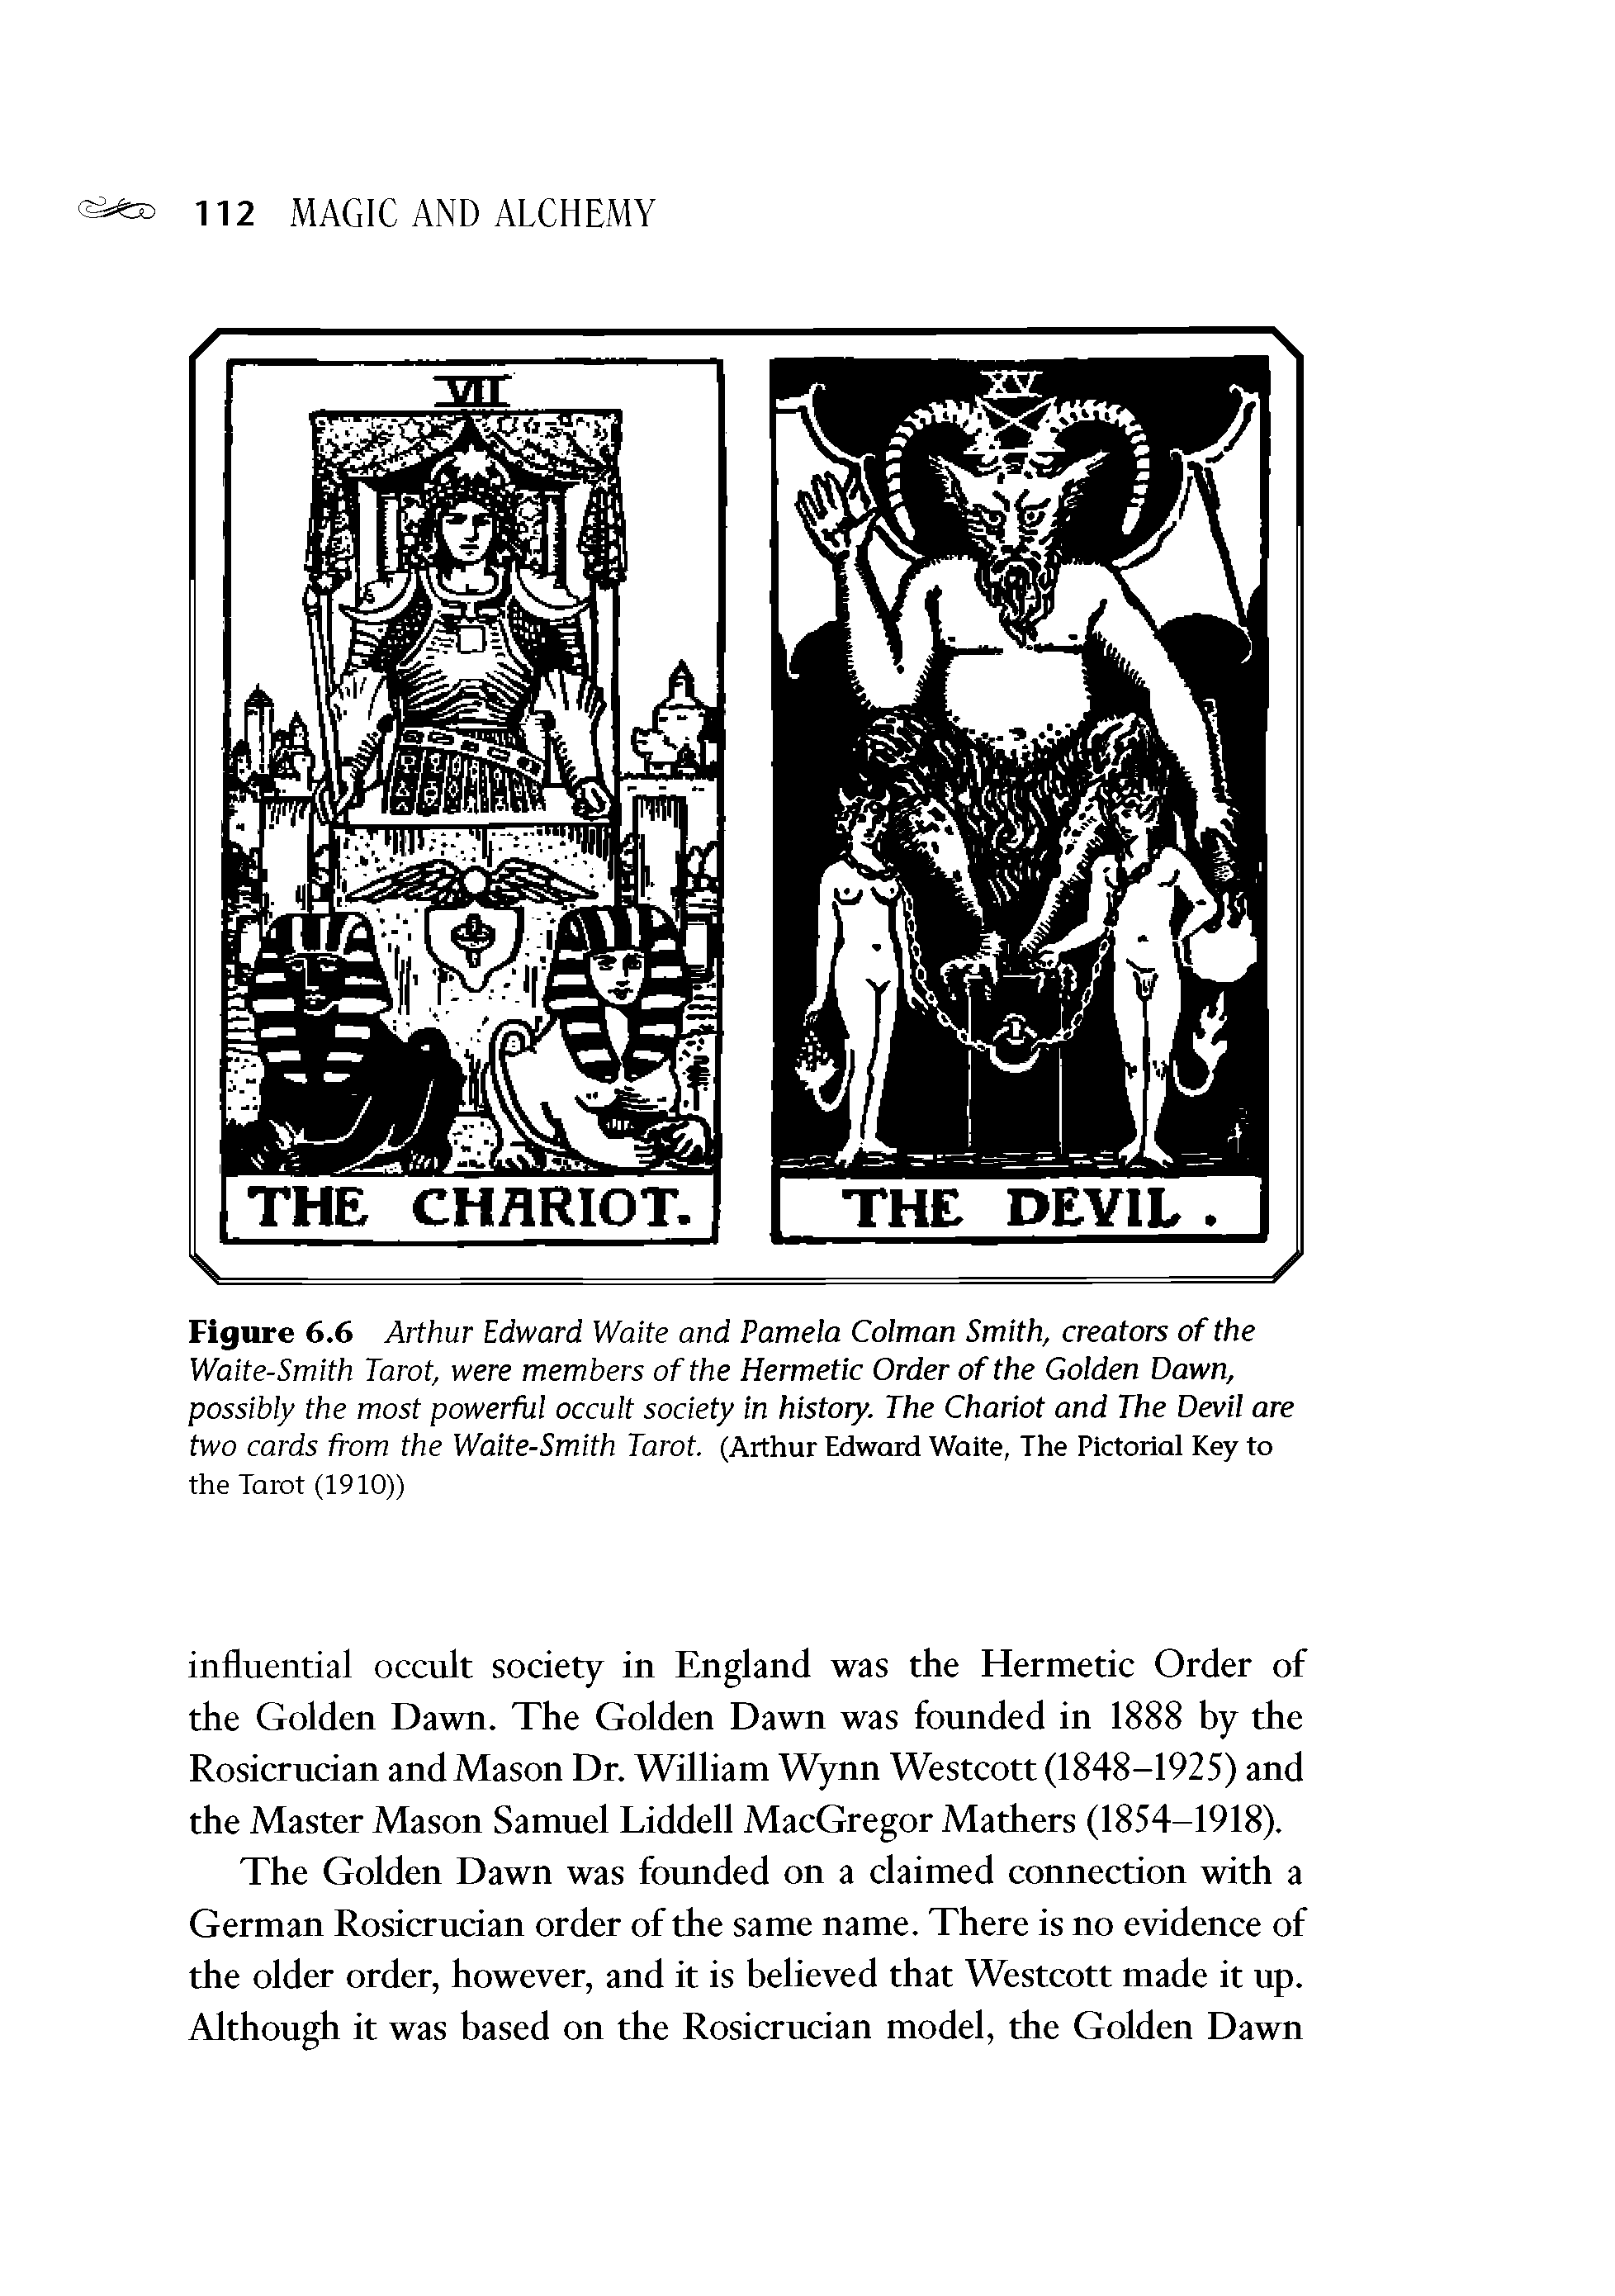 Figure 6.6 Arthur Edward Waite and Pamela Colman Smith, creators of the Waite-Smith Tarot, were members of the Hermetic Order of the Golden Dawn, possibly the most powerful occult society in history. The Chariot and The Devil are two cards from the Waite-Smith Tarot. (Arthur Edward Waite, The Pictorial Key to...